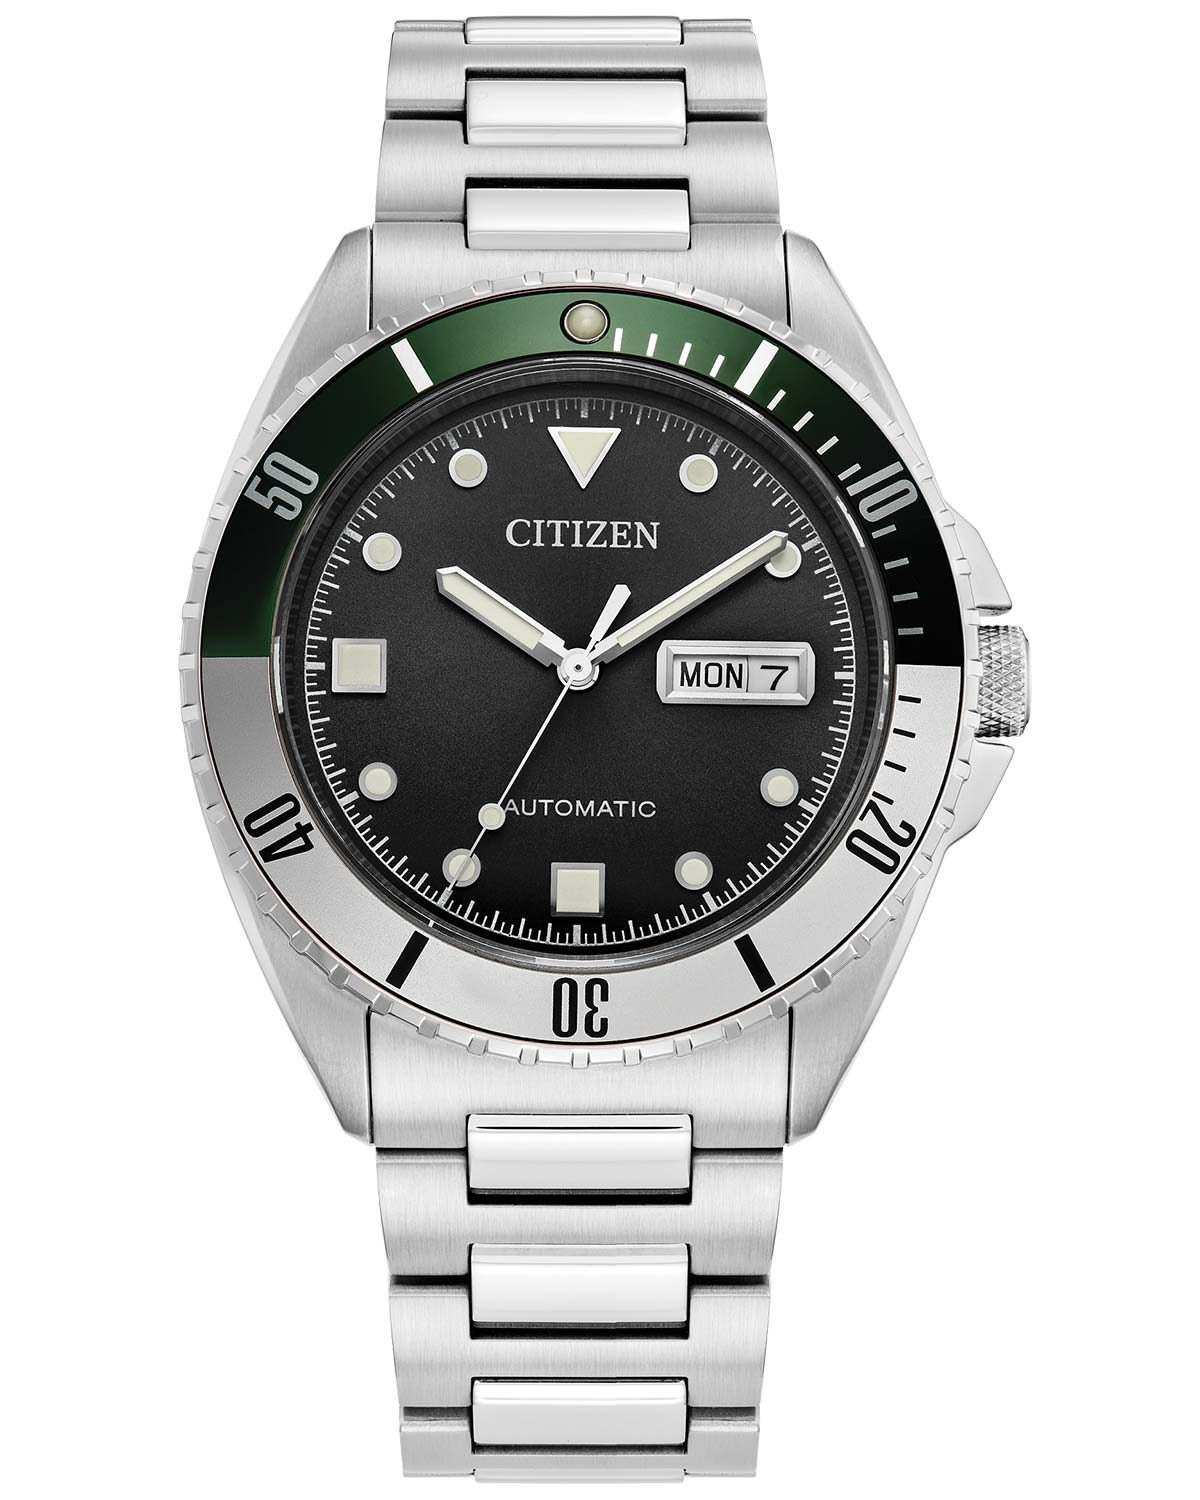 Citizen’s New Sport Automatic Collection Strikes the Perfect Balance of ...